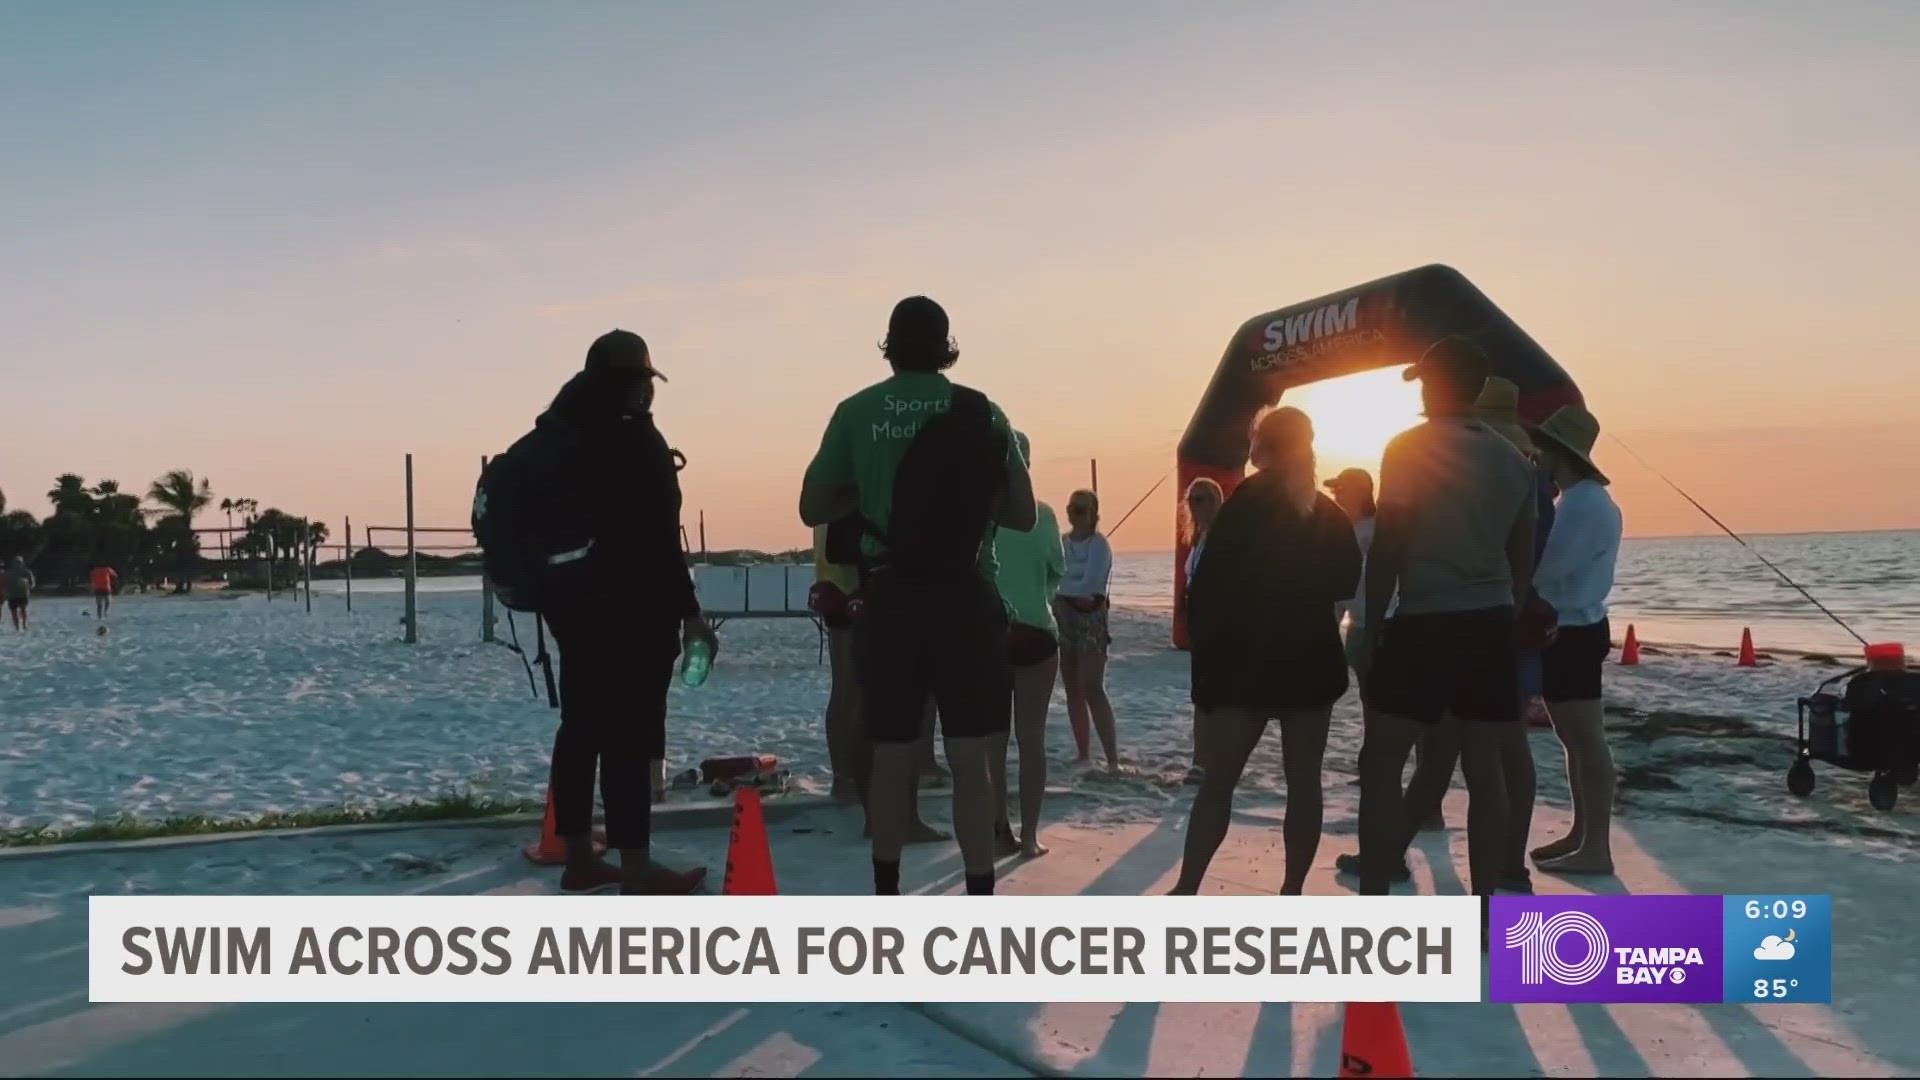 The Swim Across America Tampa Bay Open Water Swim event has raised almost two million dollars to help fund cancer research over the last several years.